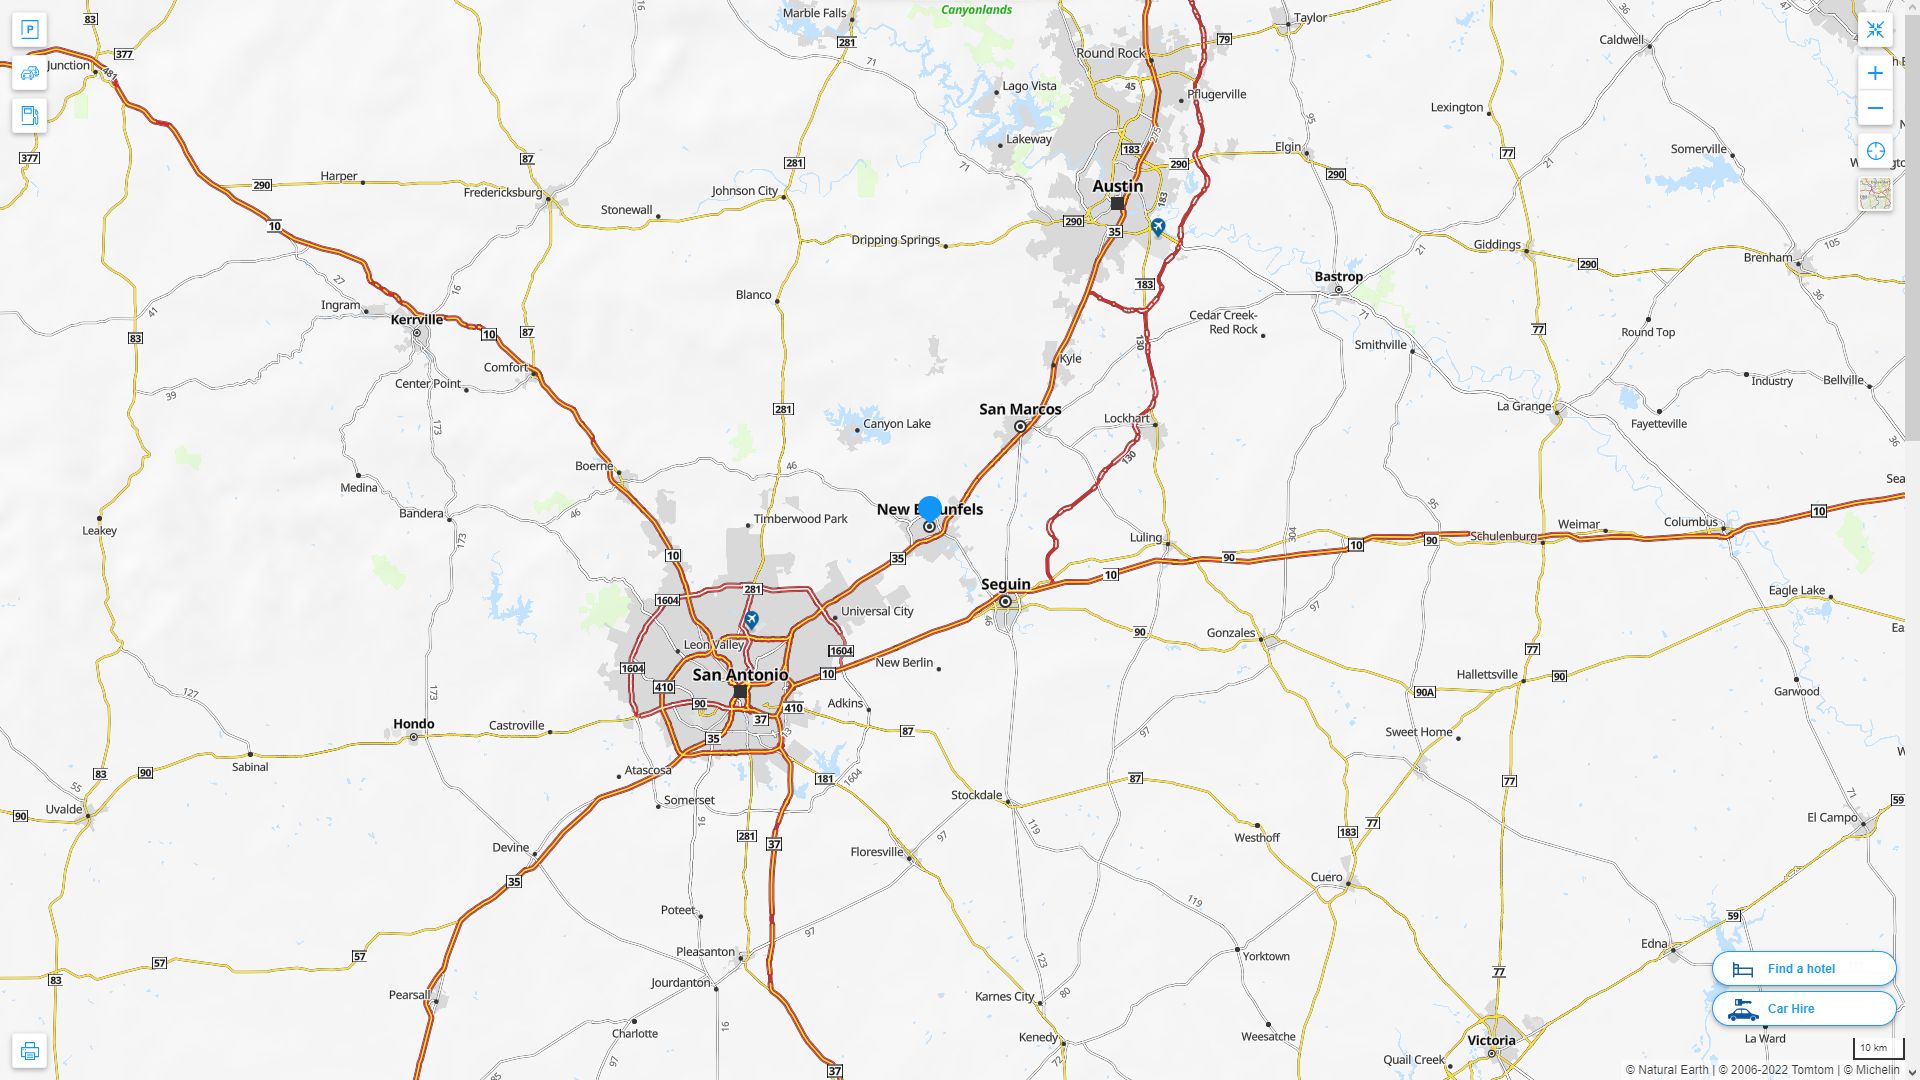 New Braunfels Texas Highway and Road Map